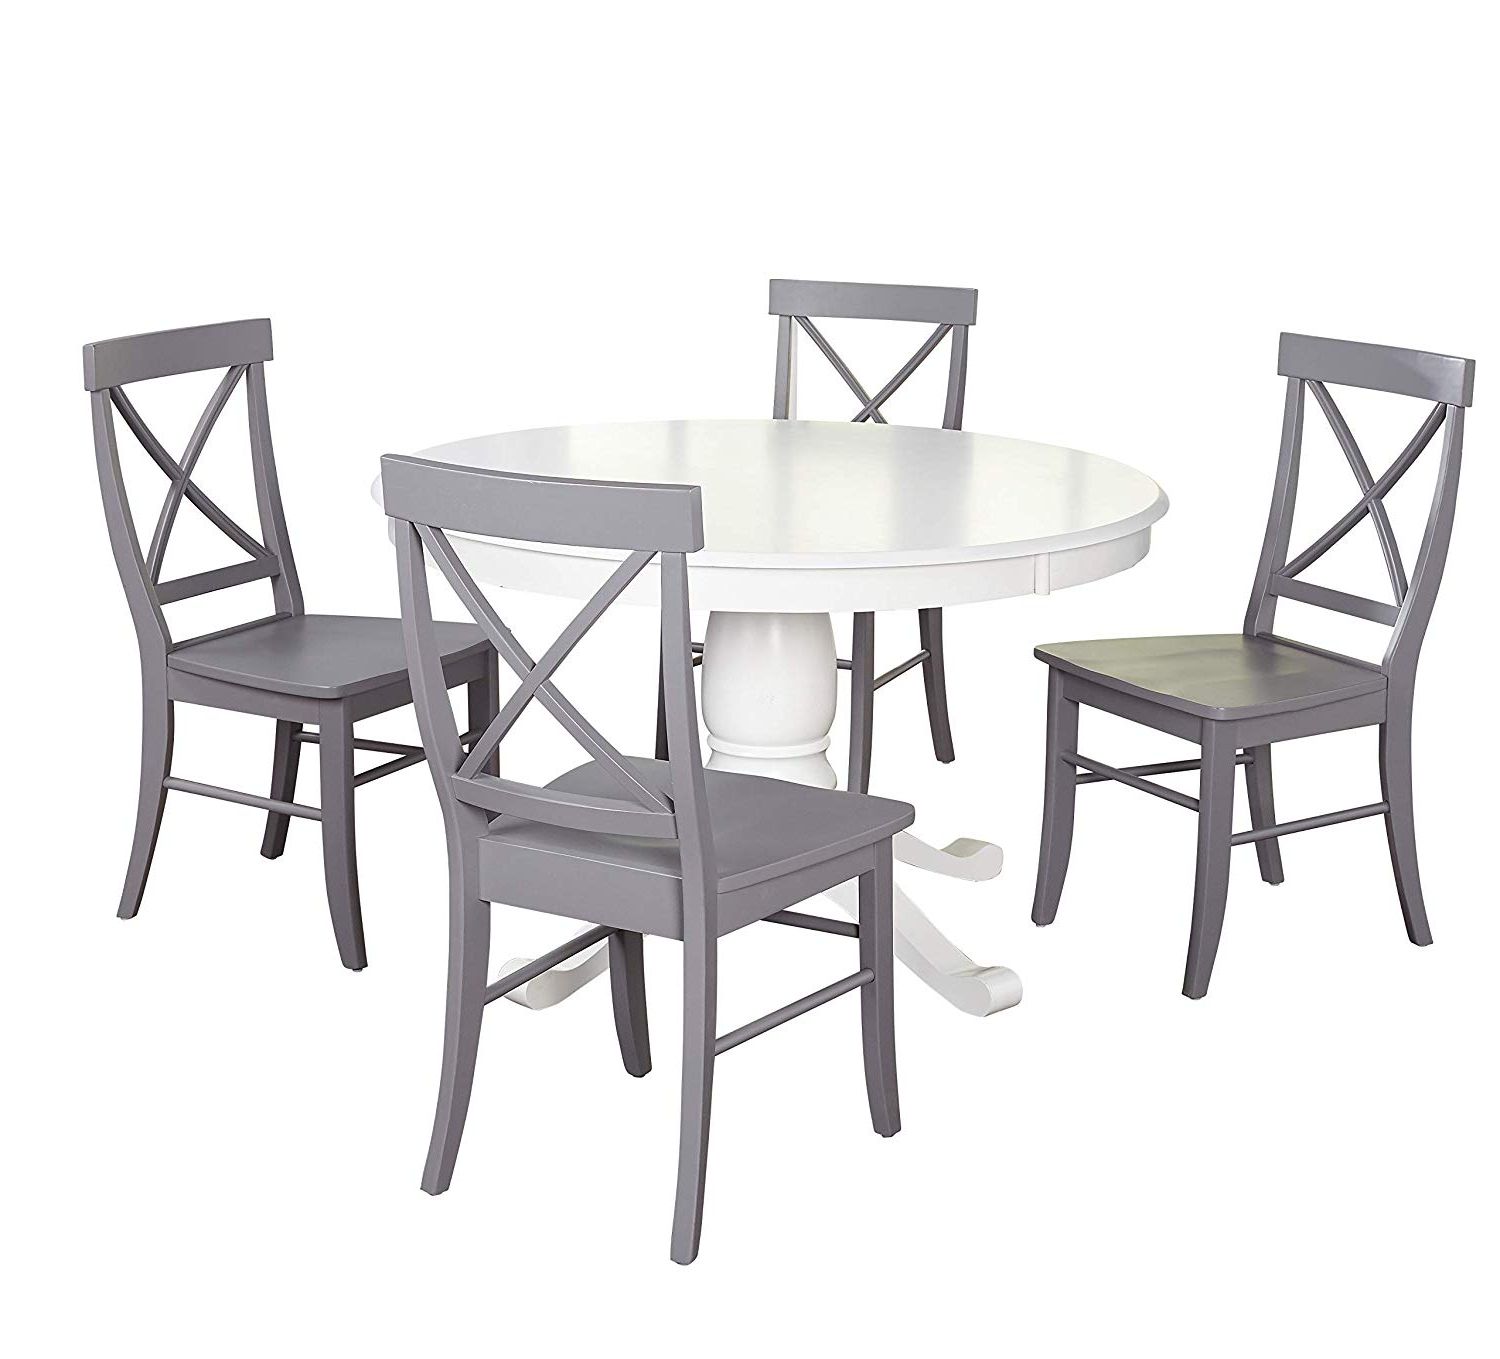 Amazon: Target Marketing Systems Dawson Modern Pertaining To Recent Dawson Pedestal Dining Tables (View 10 of 25)